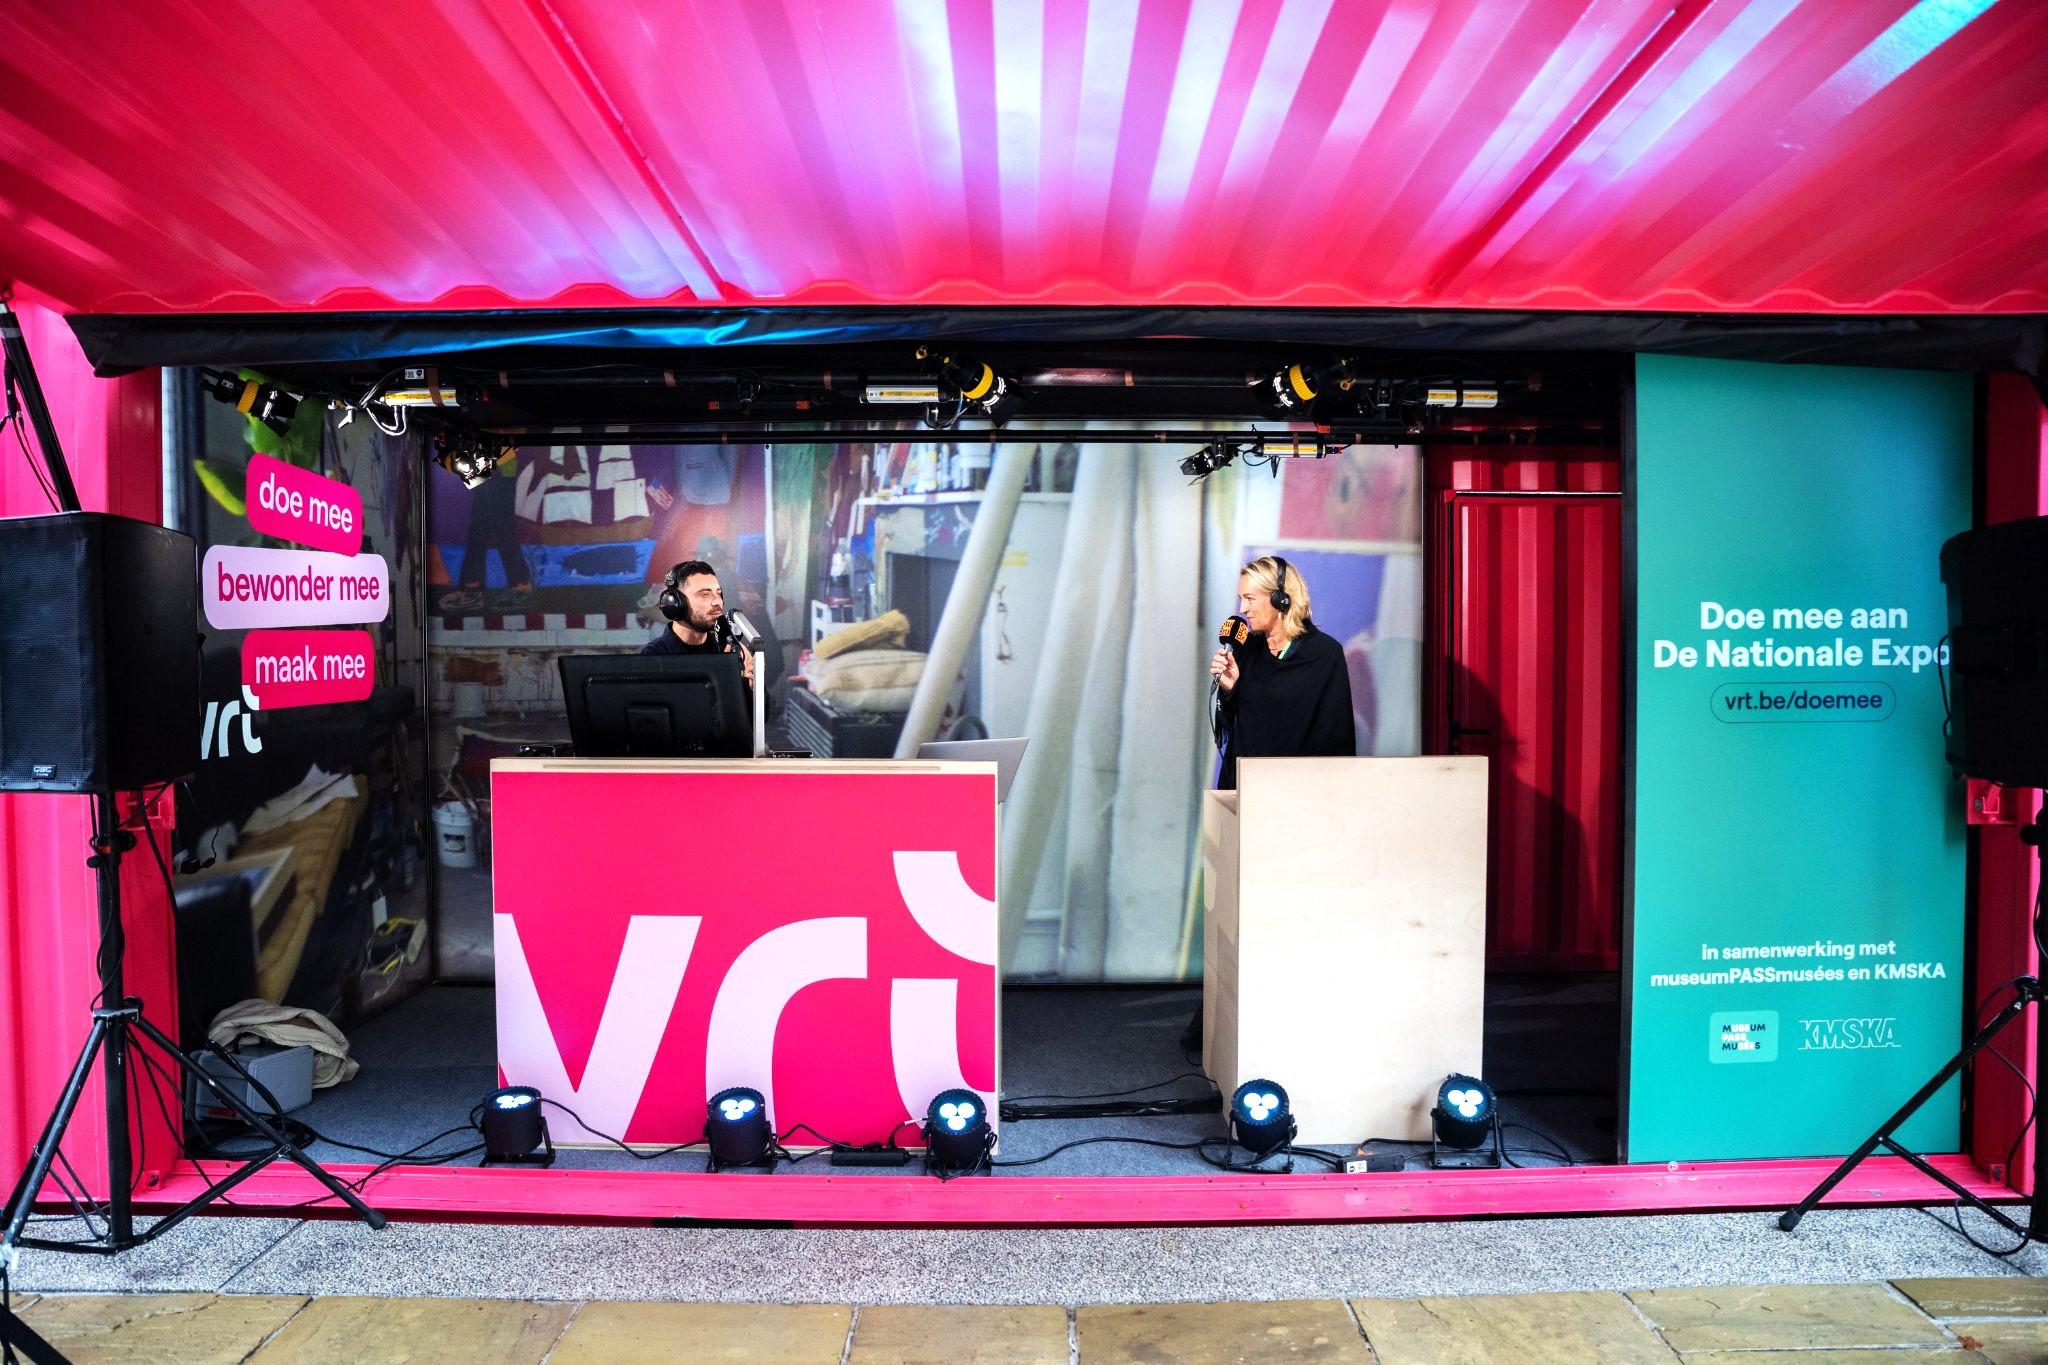 Pink 20 foot new Mobile Radio studio for STUBRU with custom banners, LED lights and speakers in Antwerp city public